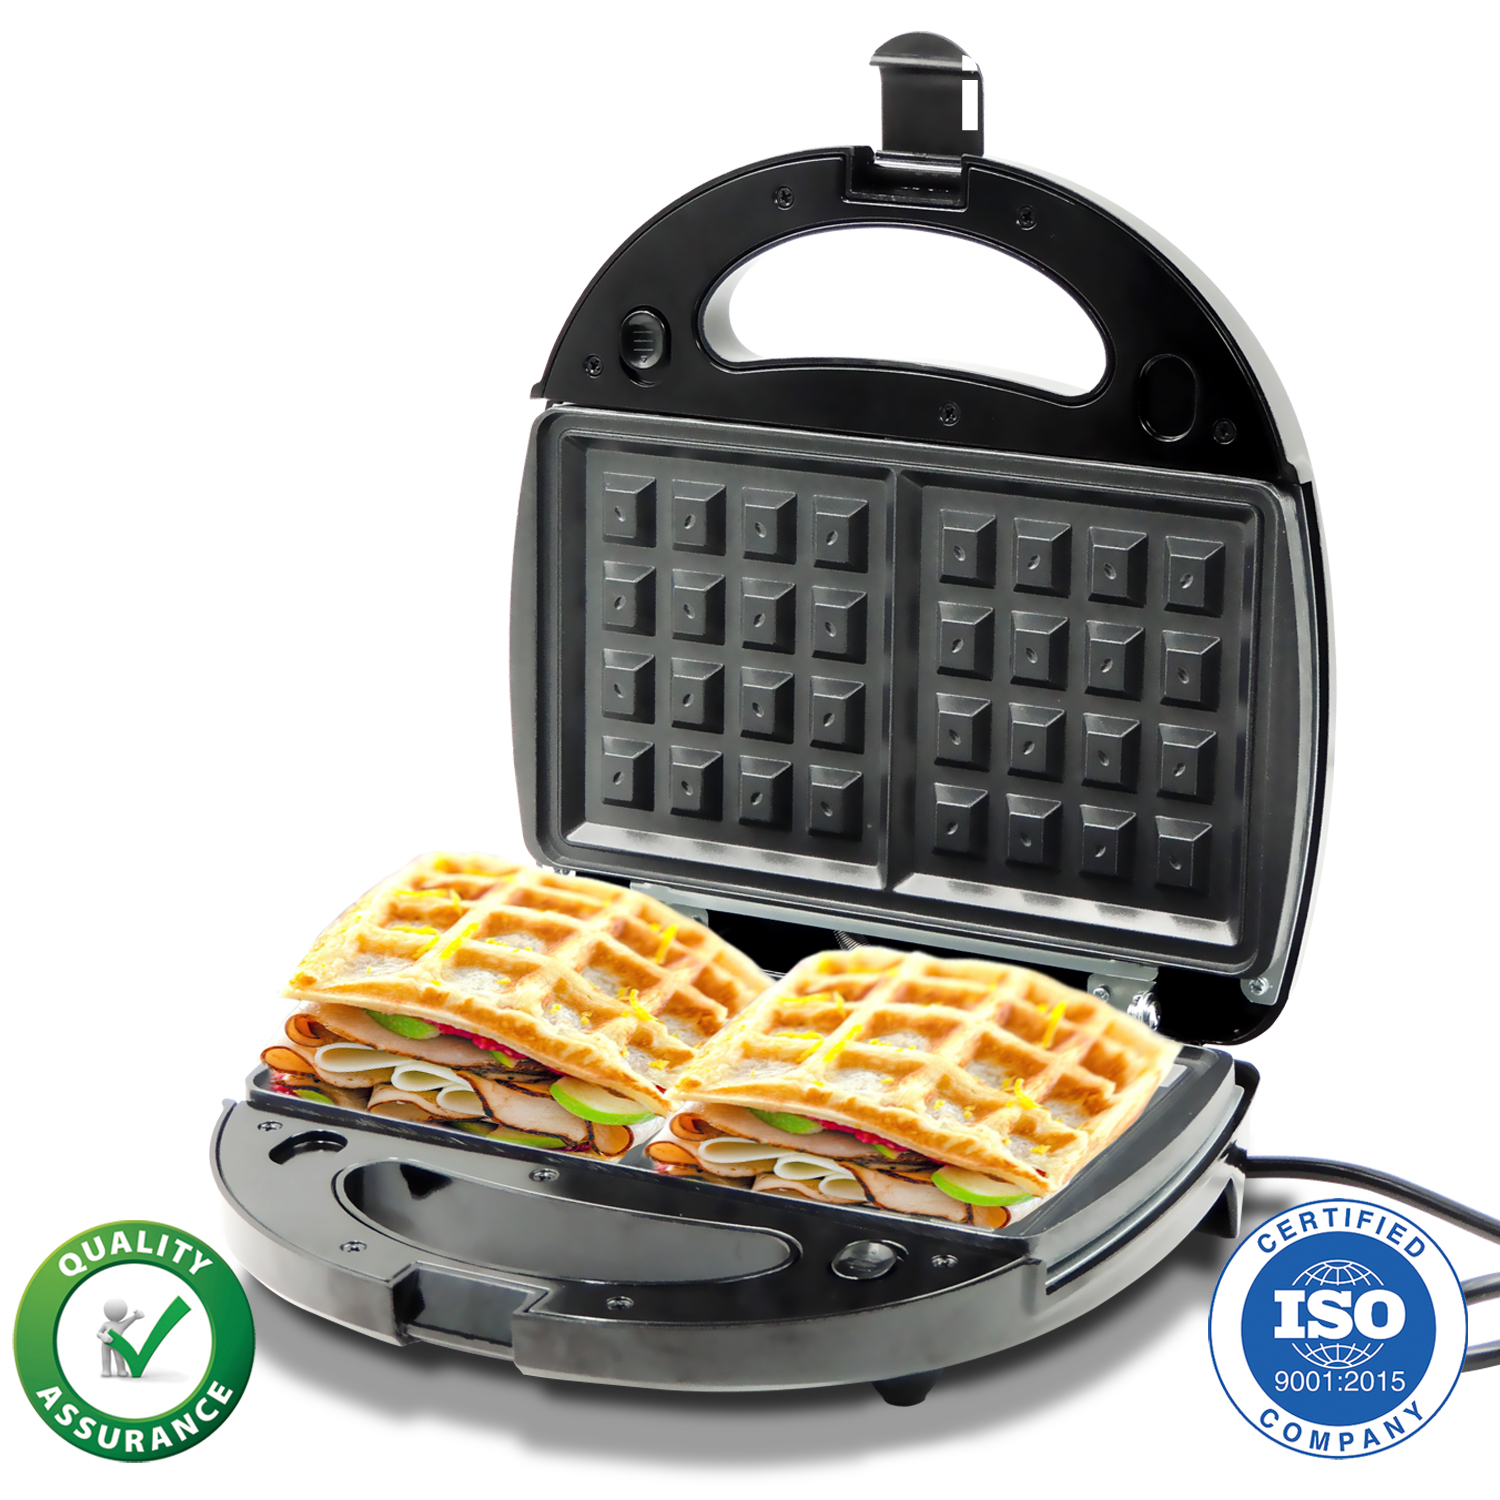 600W Electric Double Layer Heating Sandwich Maker and Waffle Maker